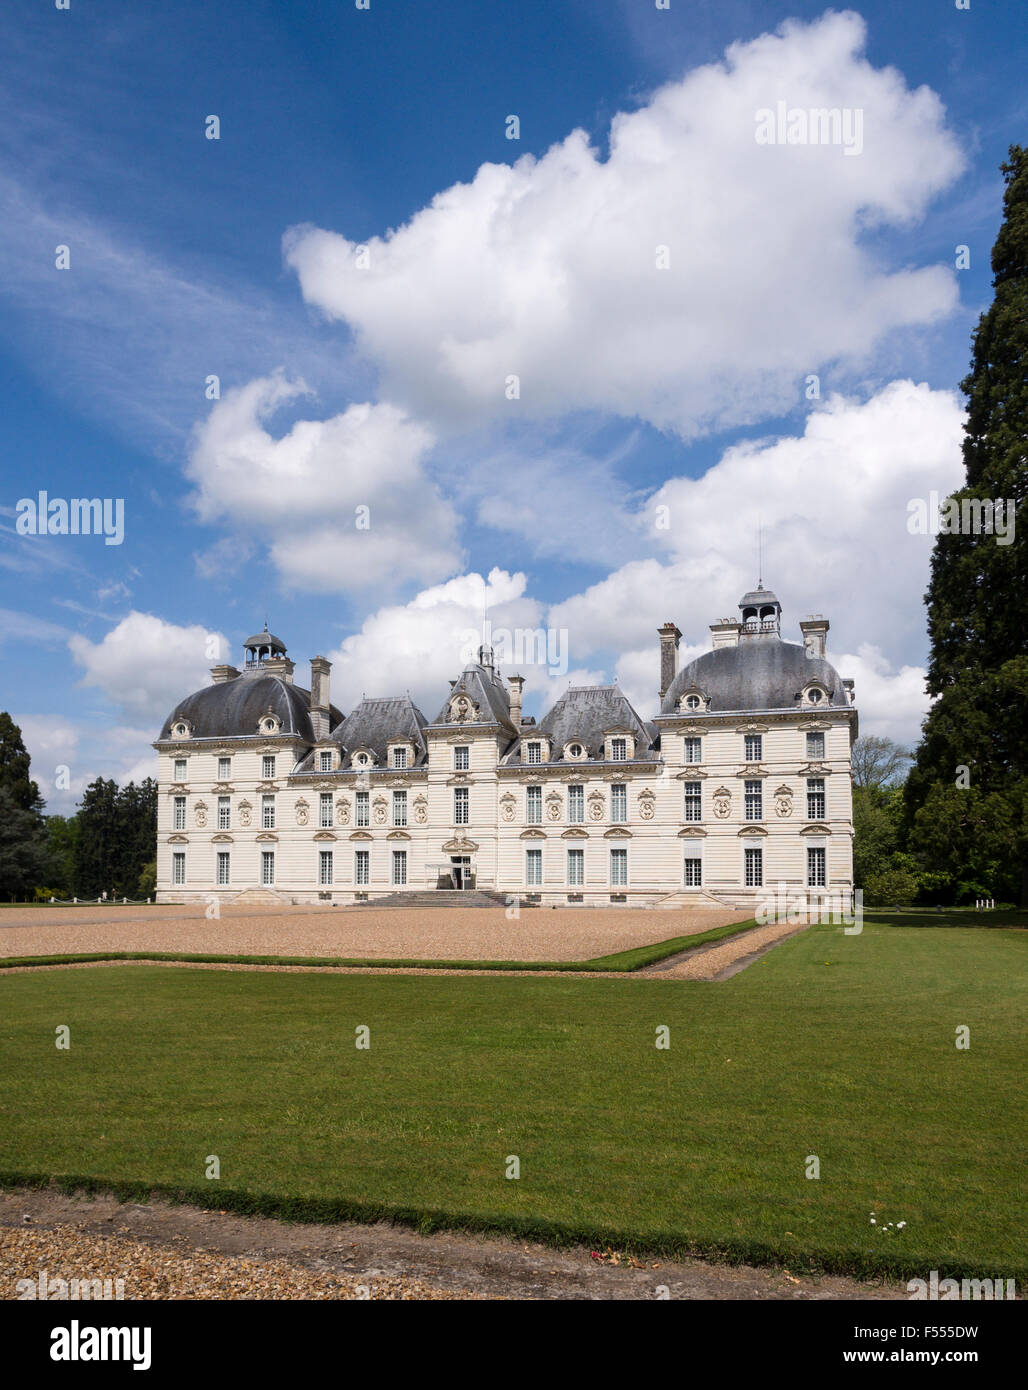 The Front Facade of Cheverny from the grounds. Large billowing clouds dominate the blue sky behind the famouse Chateau. Cheverny Stock Photo